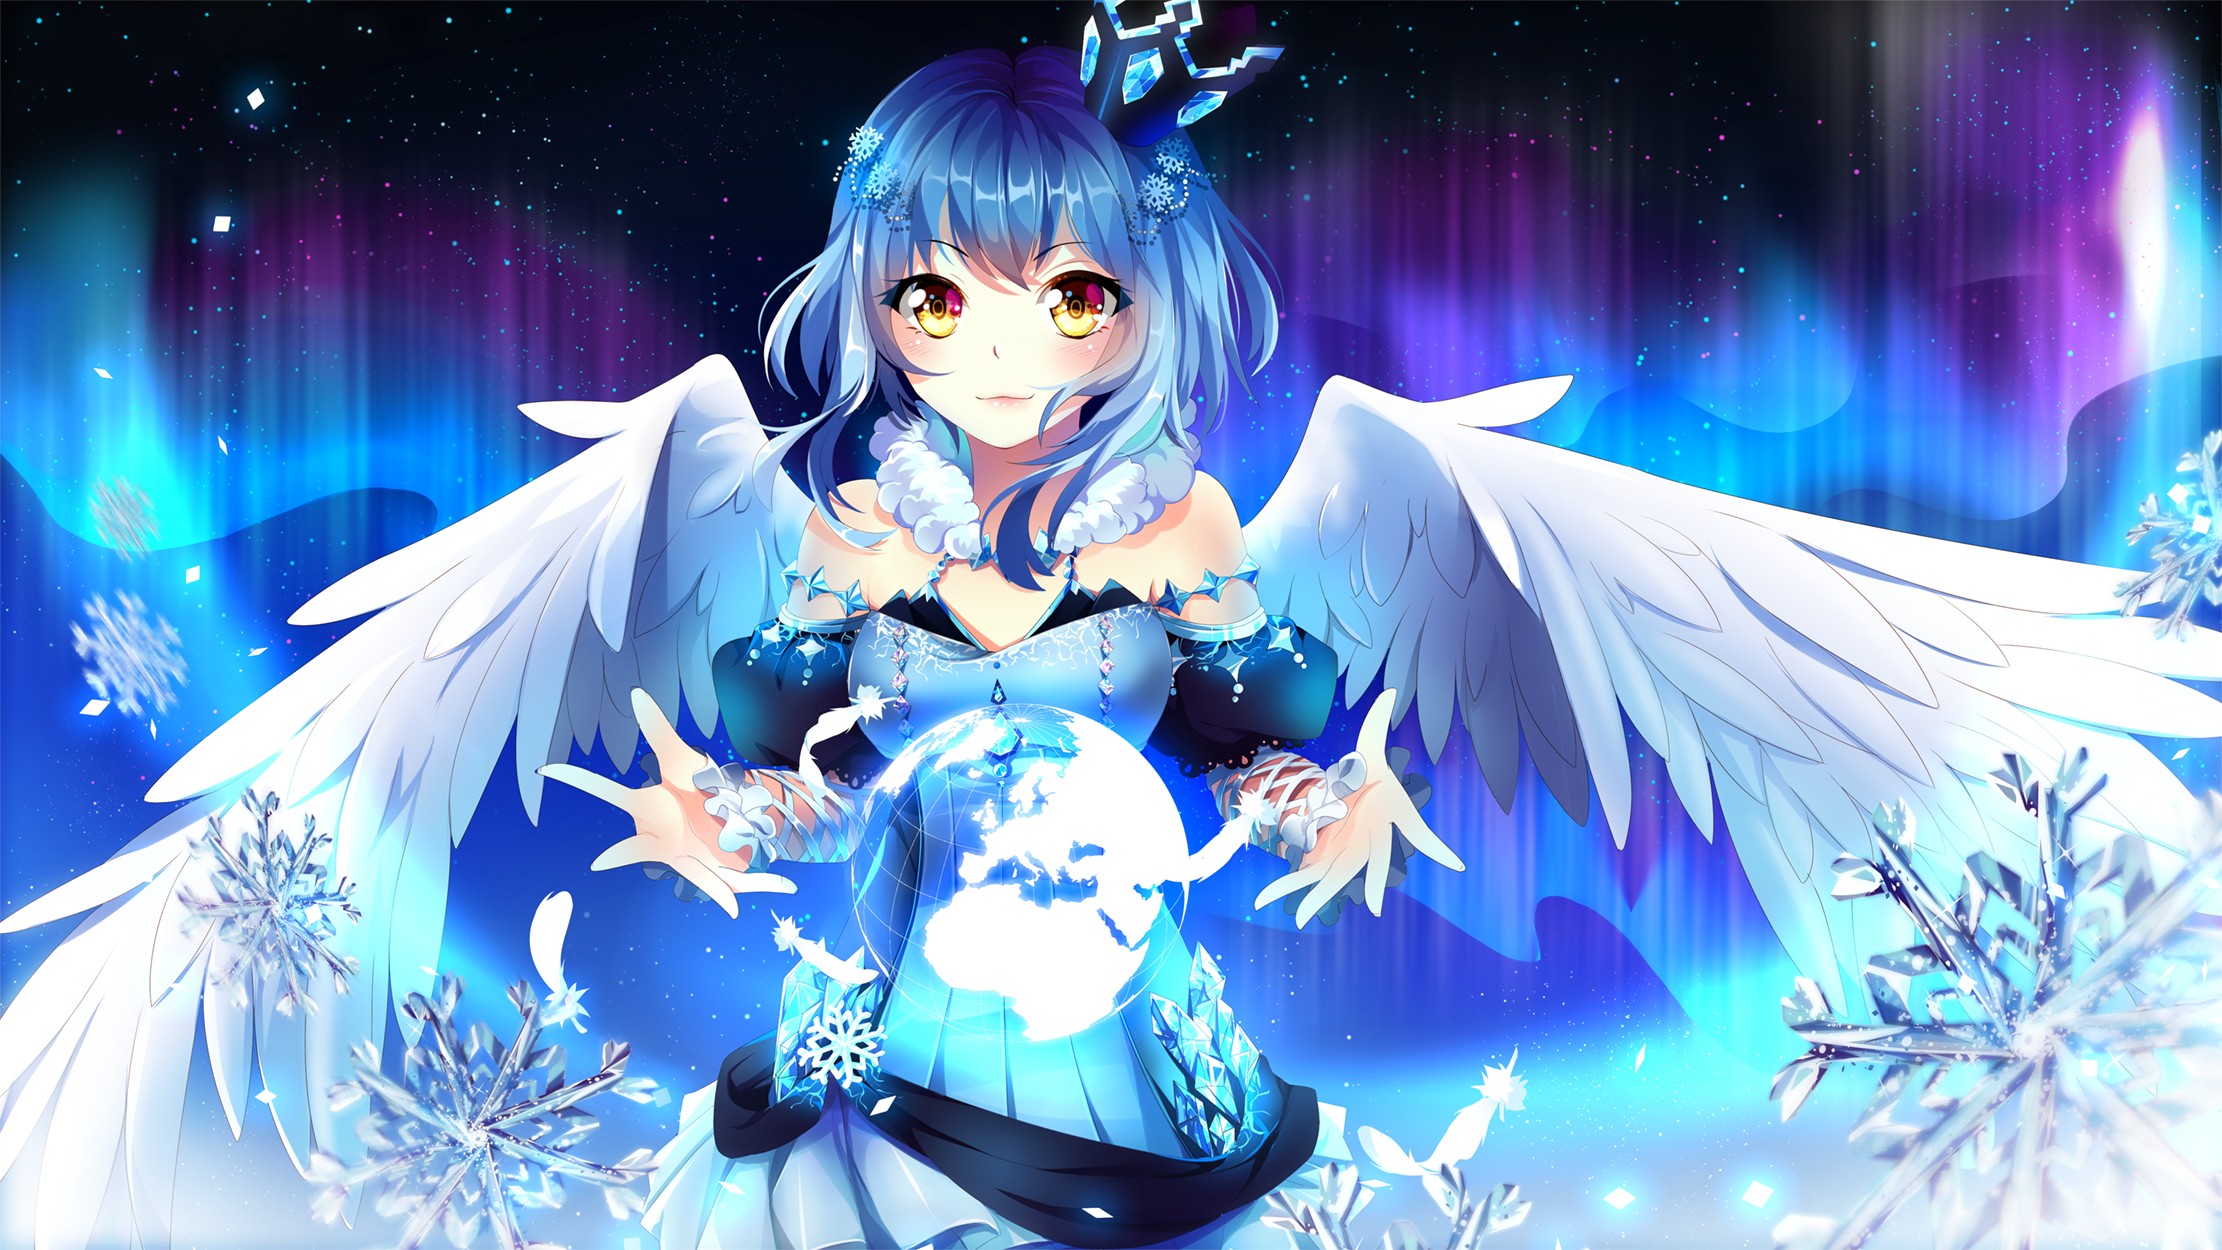 blue hair, Wings, Yellow eyes, Blue dress, Ice crystals Wallpaper